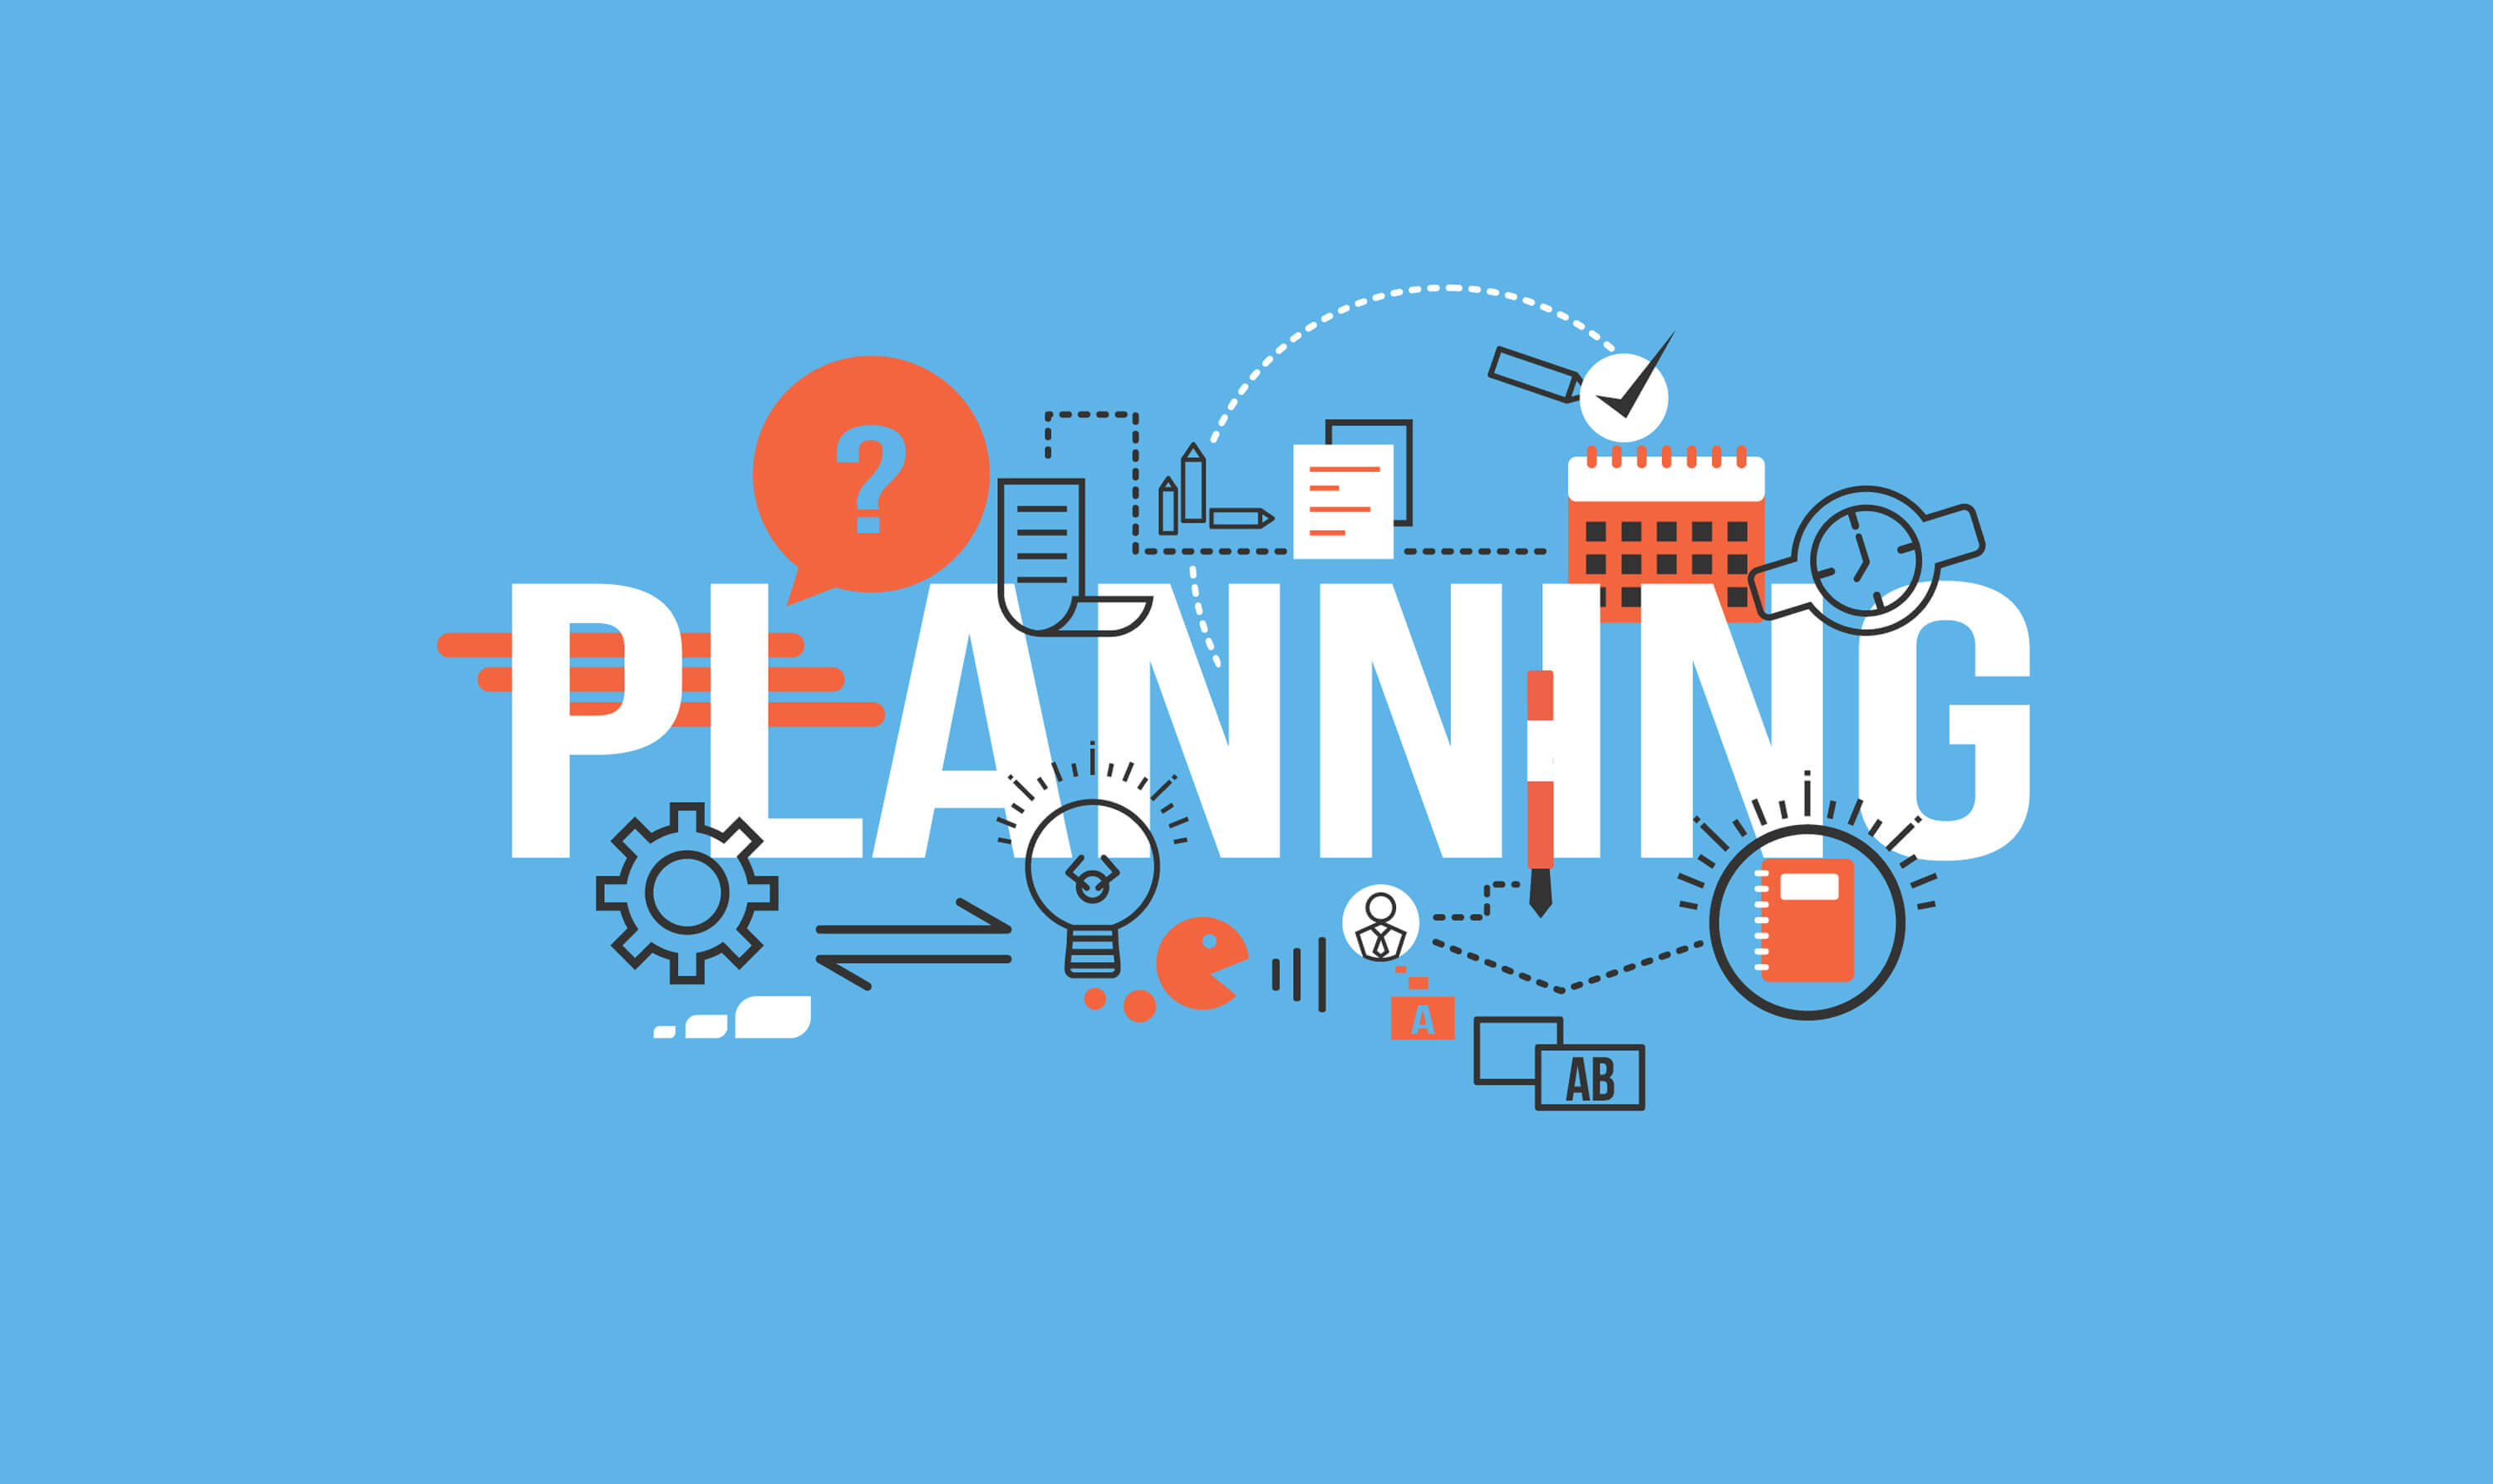 Effective milestone planning impacts your project's success